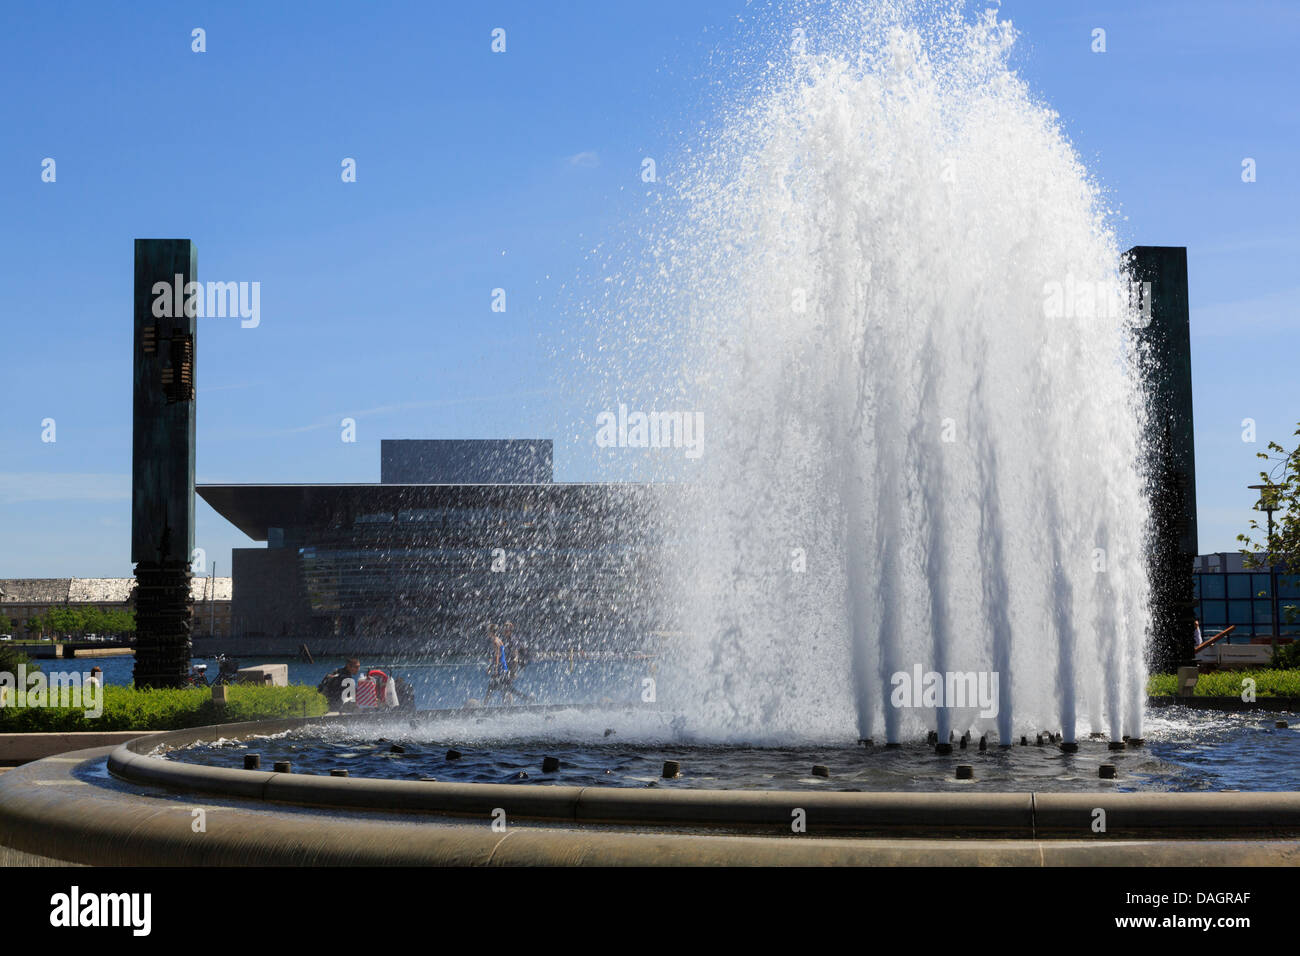 Fountain in Amaliehaven or The Amalie Gardens on waterfront with Opera House across the harbour in Copenhagen Zealand Denmark Stock Photo